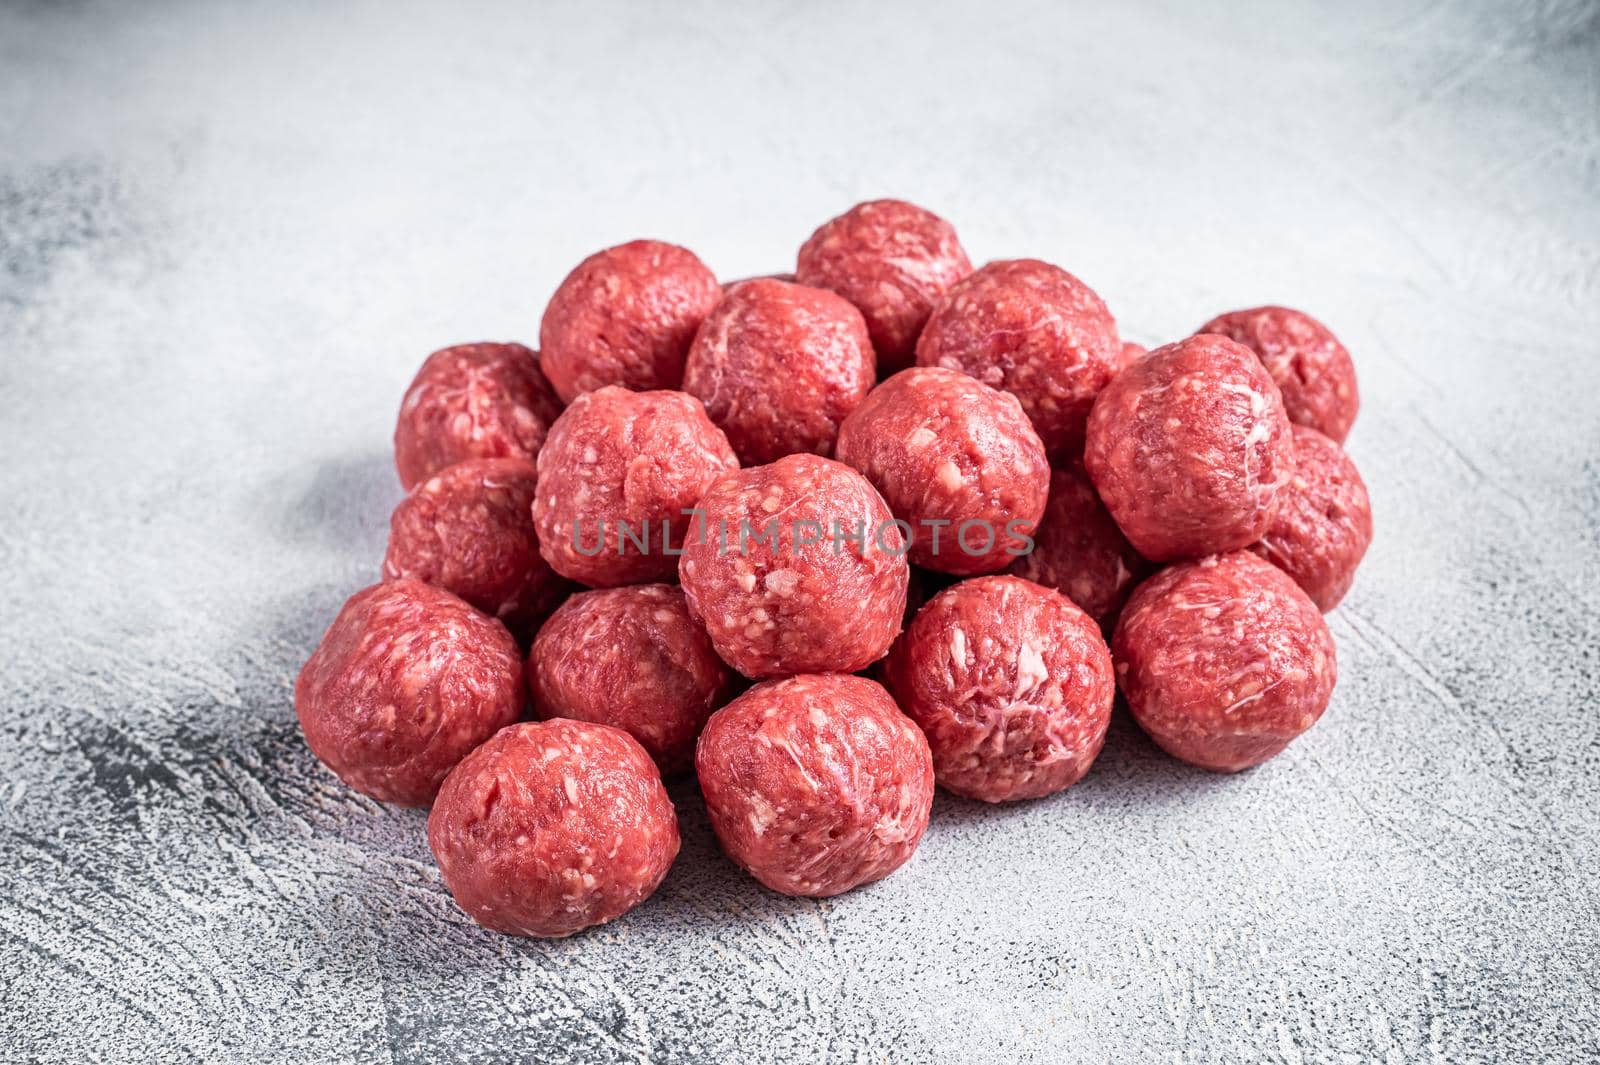 Raw beef and pork meatballs with spices on kitchen table. White background. Top view by Composter